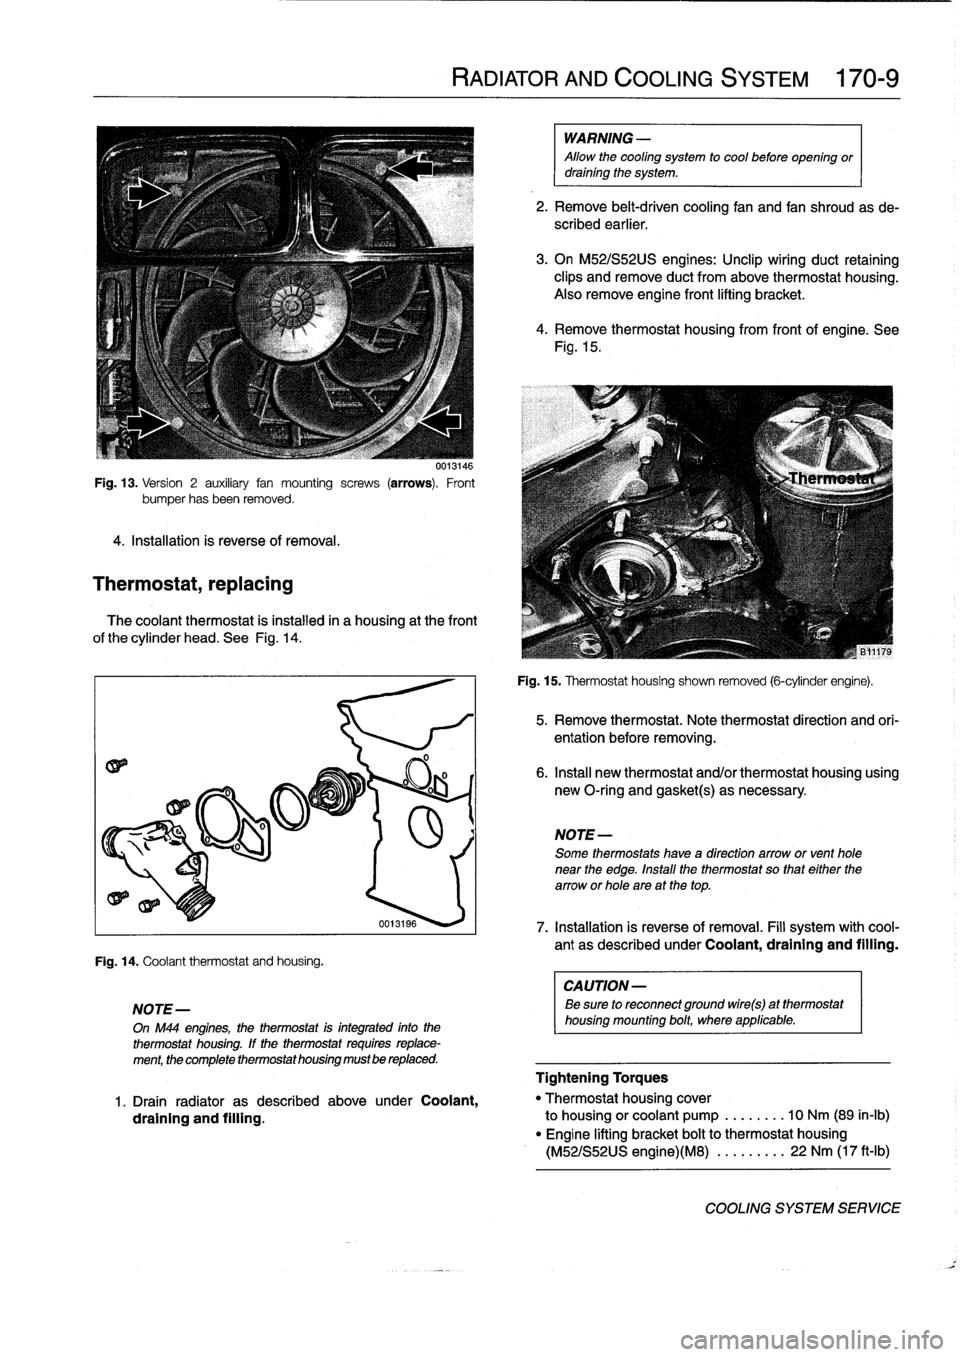 BMW 325i 1992 E36 Workshop Manual 
Fig
.
13
.
Version
2
auxiliary
fan
mounting
screws
(arrows)
.
Front
bumper
hasbeen
removed
.

4
.
Installation
is
reverse
of
removal
.

Thermostat,
replacing

0013146

The
coolant
thermostat
is
insta